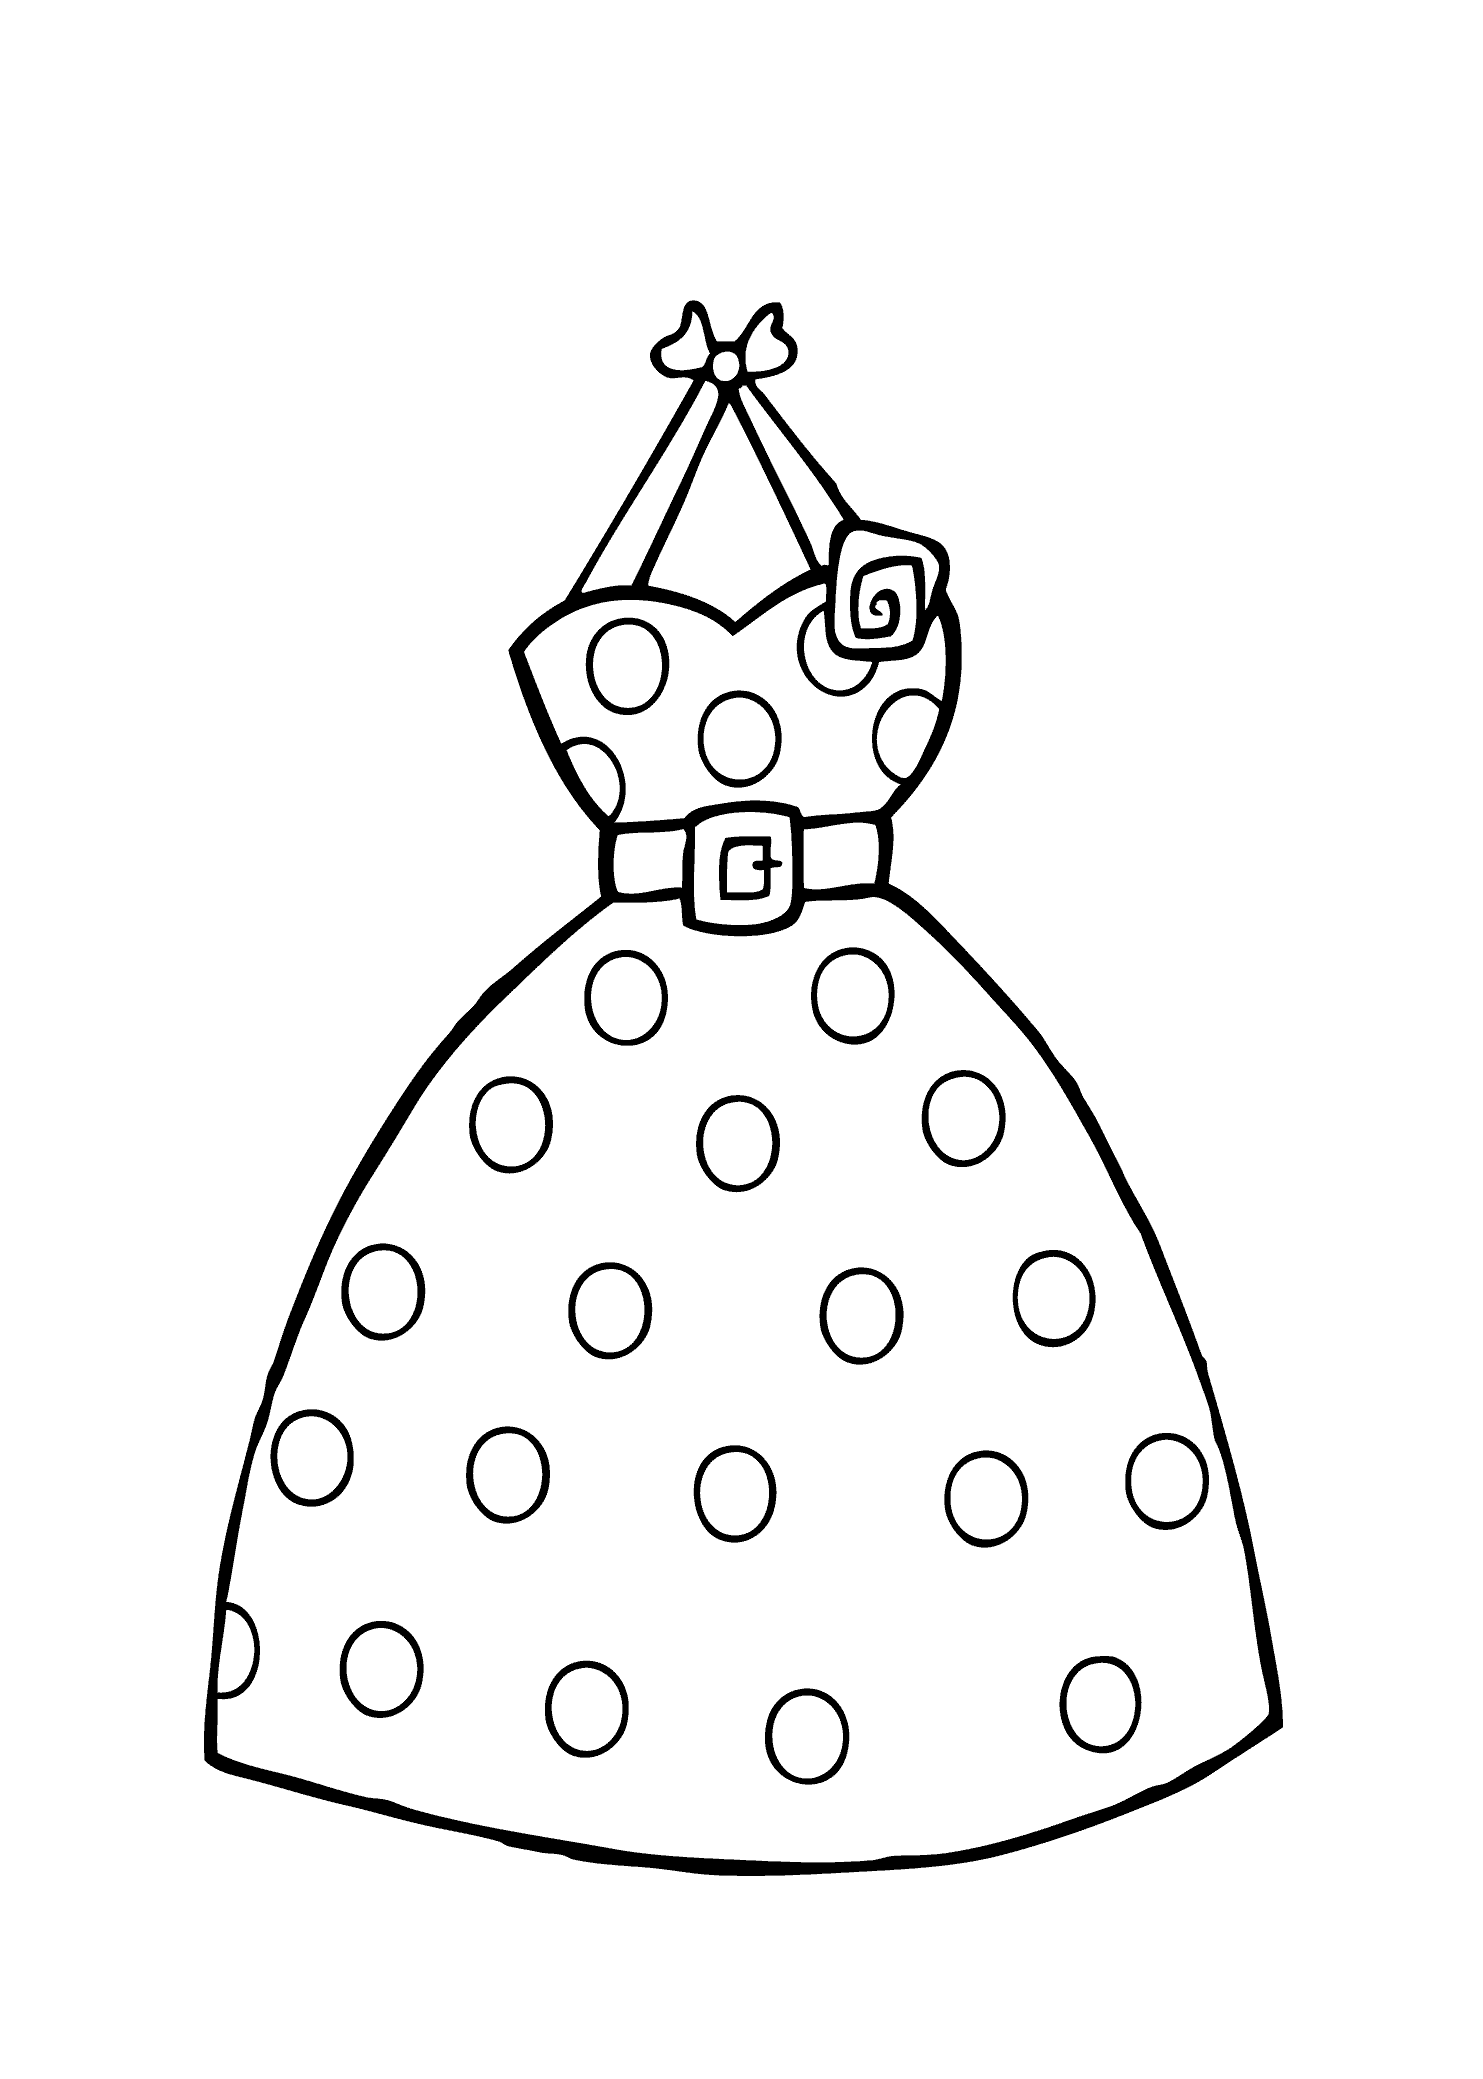 Dress Polka Dot Coloring Page For Girls, Printable Free Coloring